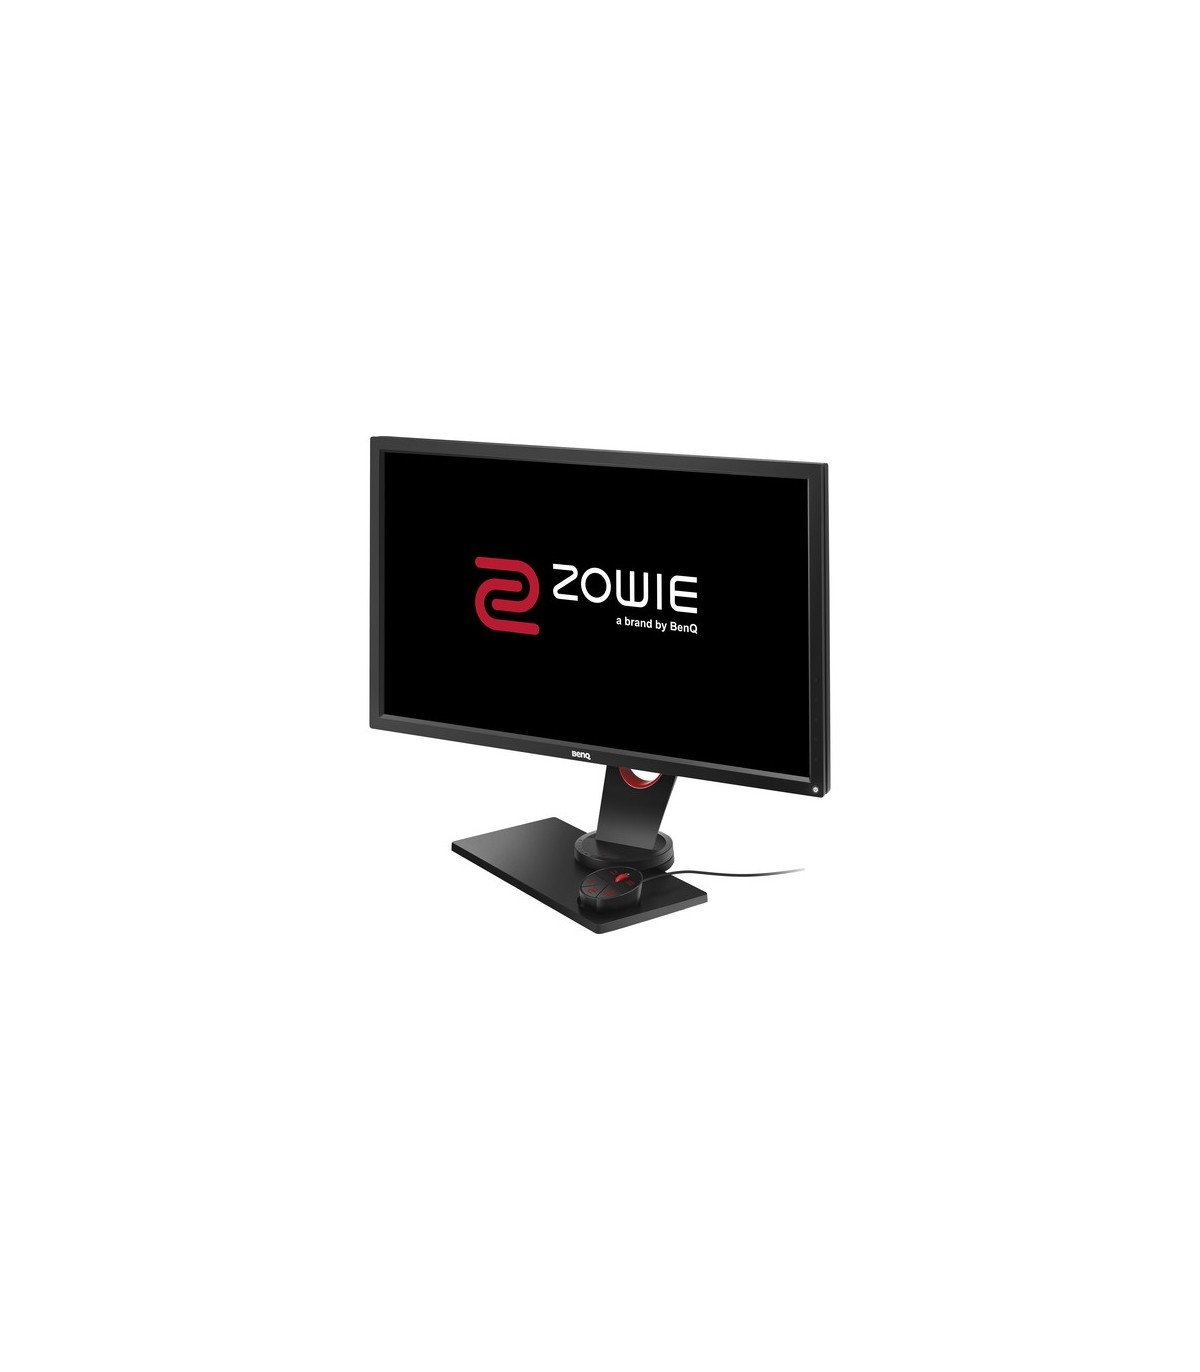 BenQ ZOWIE XL2430 Dubai - Buy BenQ Monitor From Authorize UAE Reseller